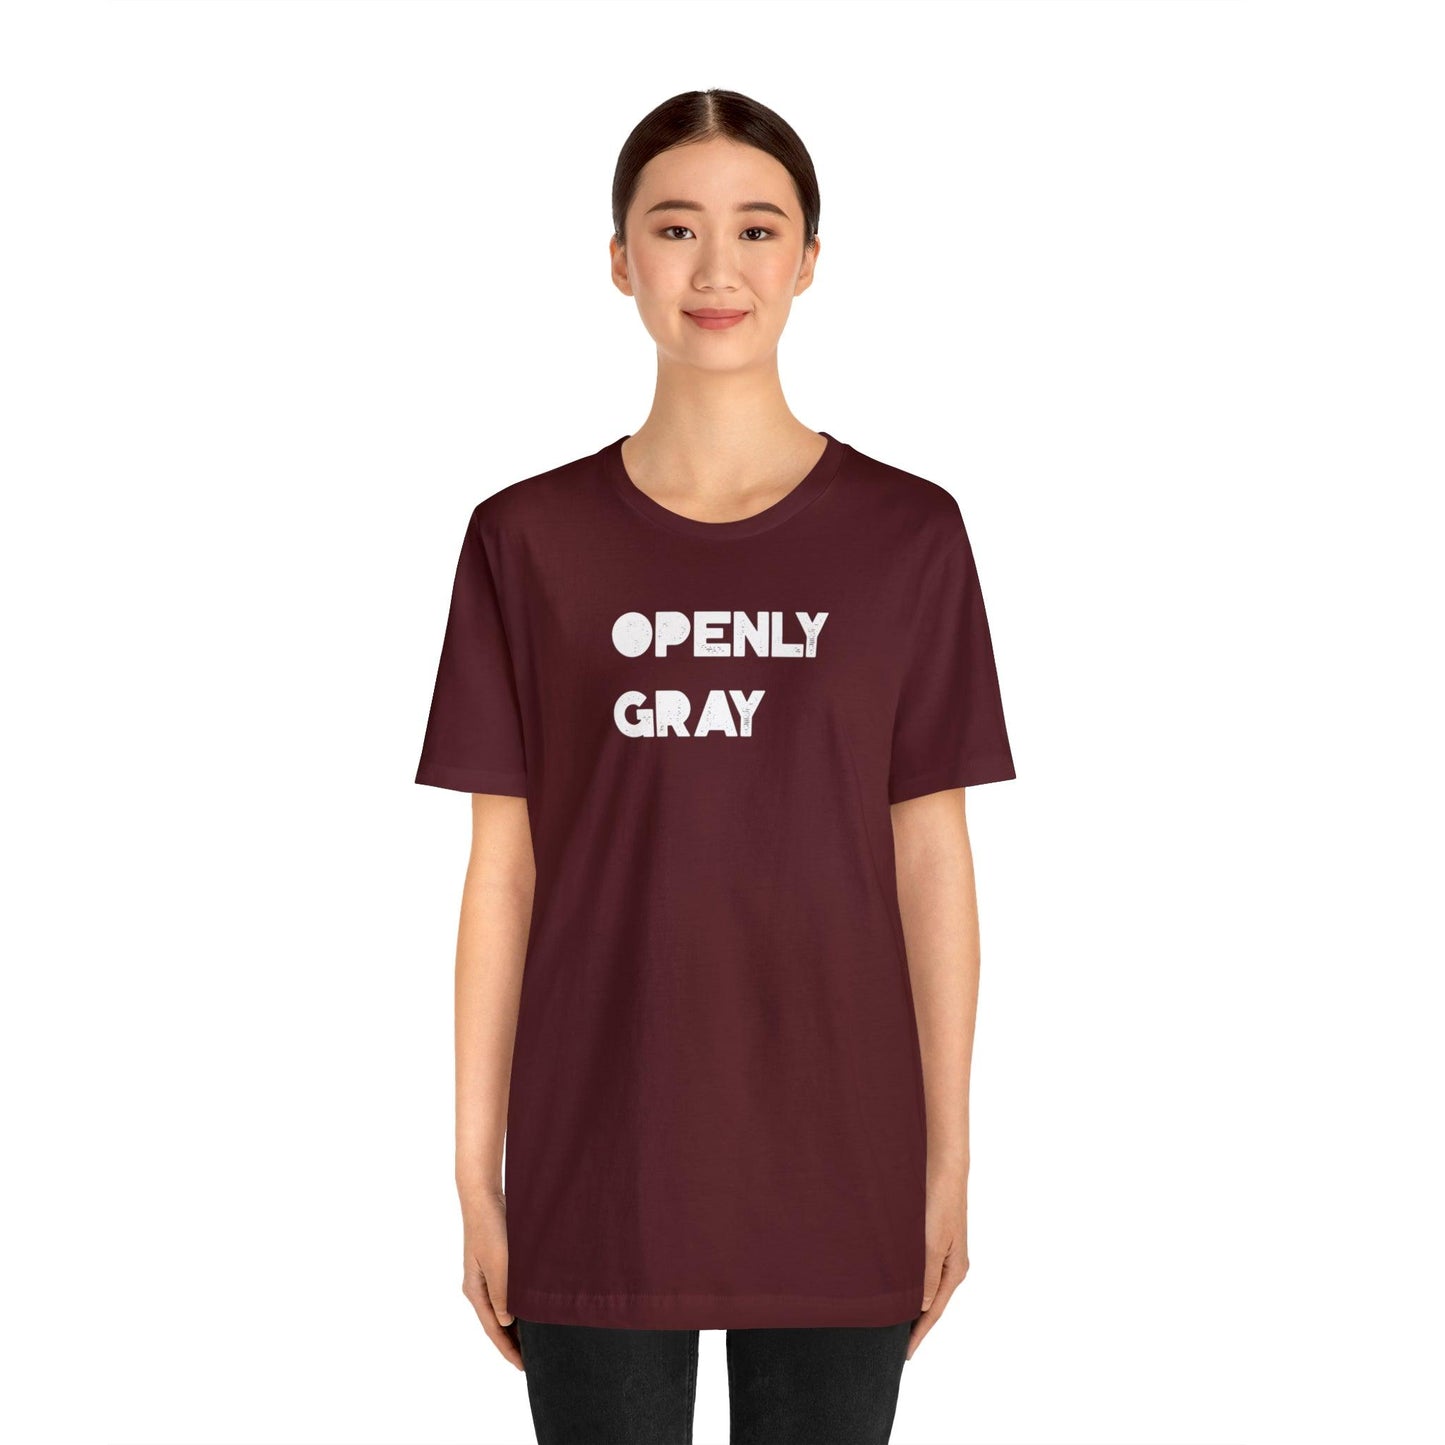 Openly Gray - Wicked Naughty Apparel